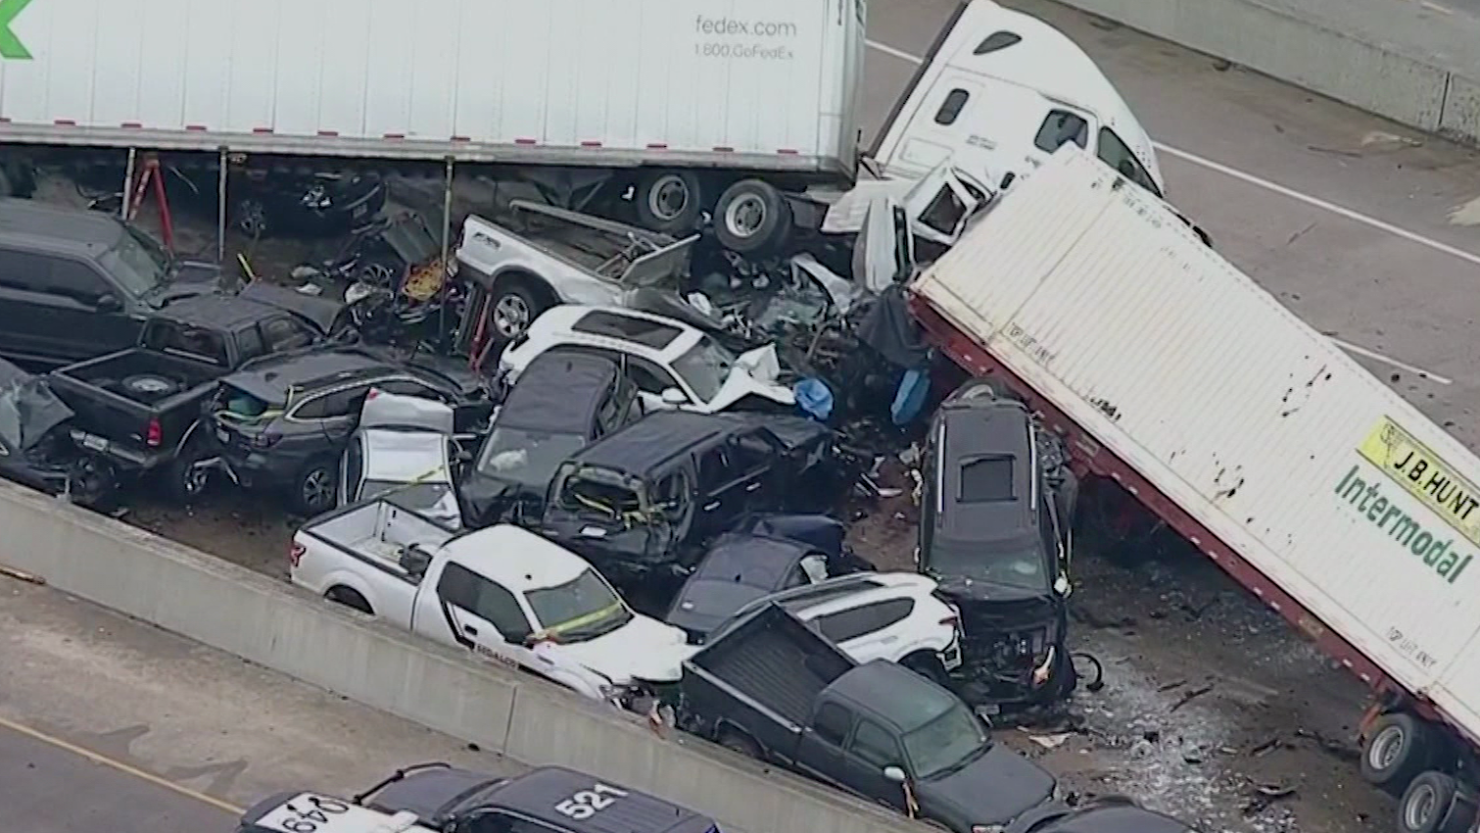 At least six people were killed in a crash in Fort Worth that involved more than 100 vehicles.